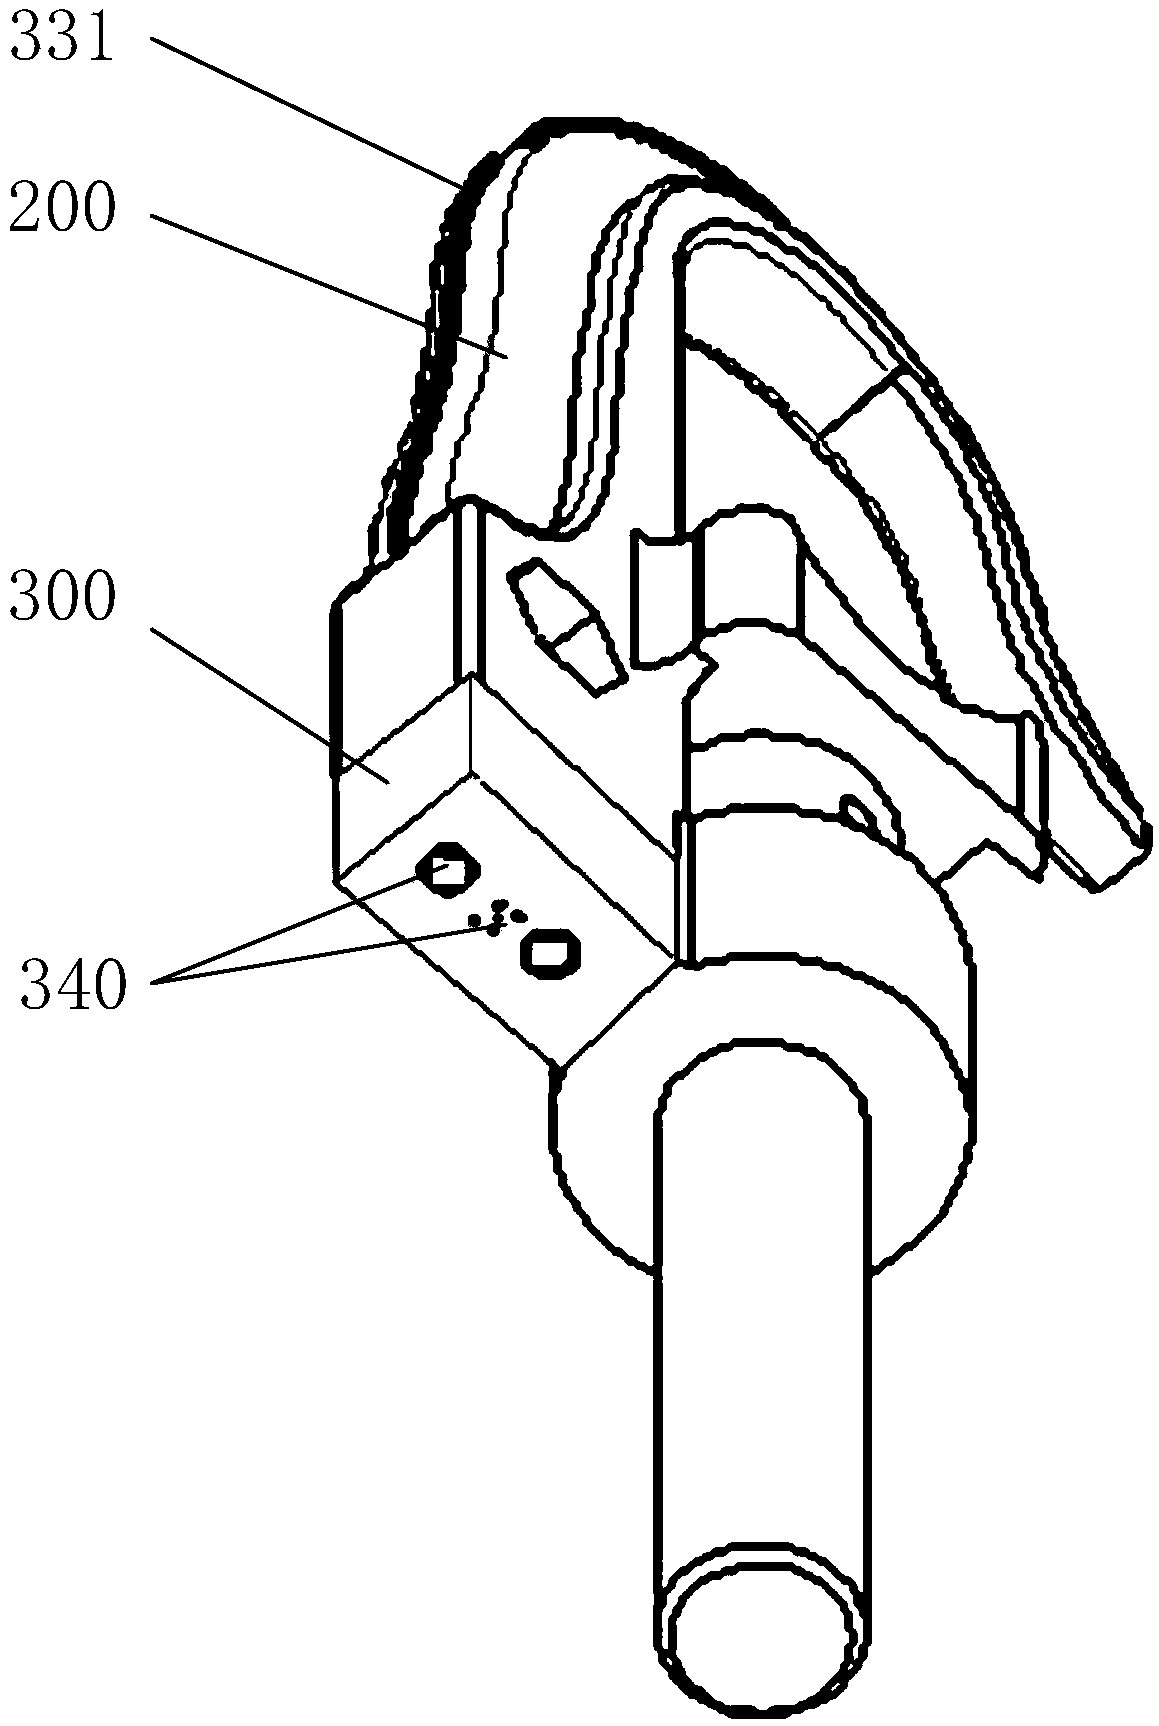 Electricity-testing grounding lead hanger with GPS (Global Position System) function, and grounding measurement device